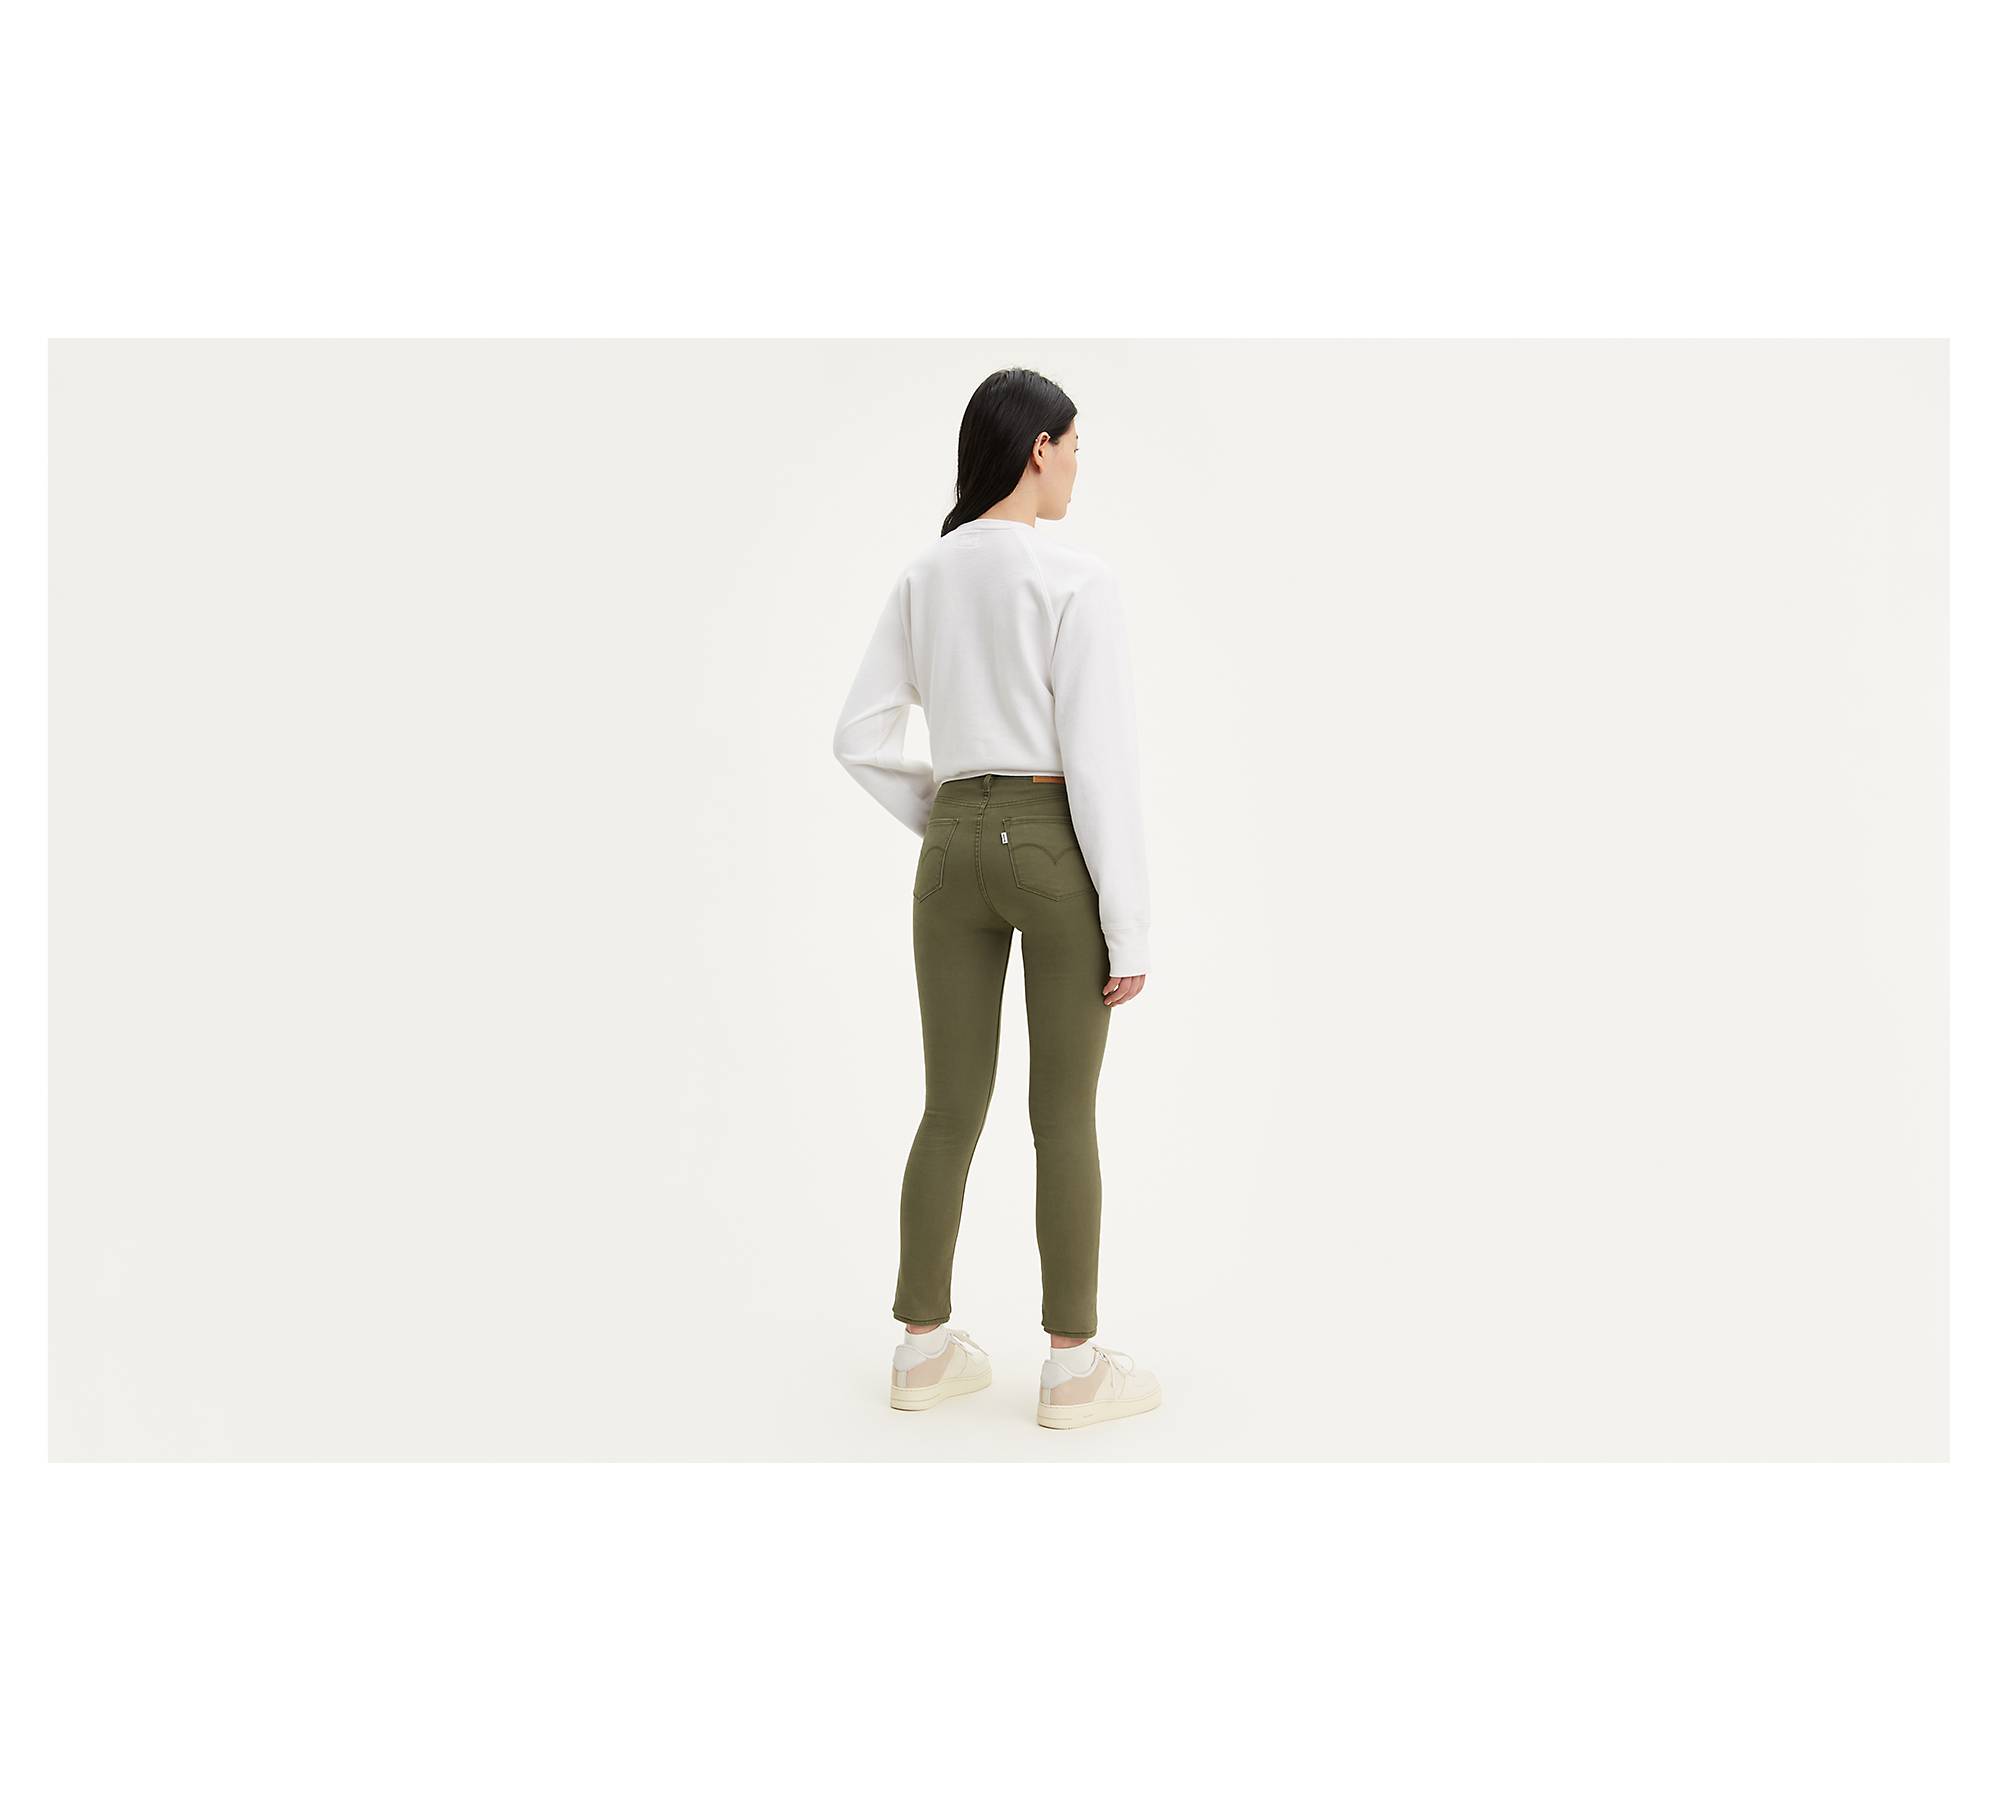 721 High Rise Skinny Women's Jeans - Green | Levi's® US